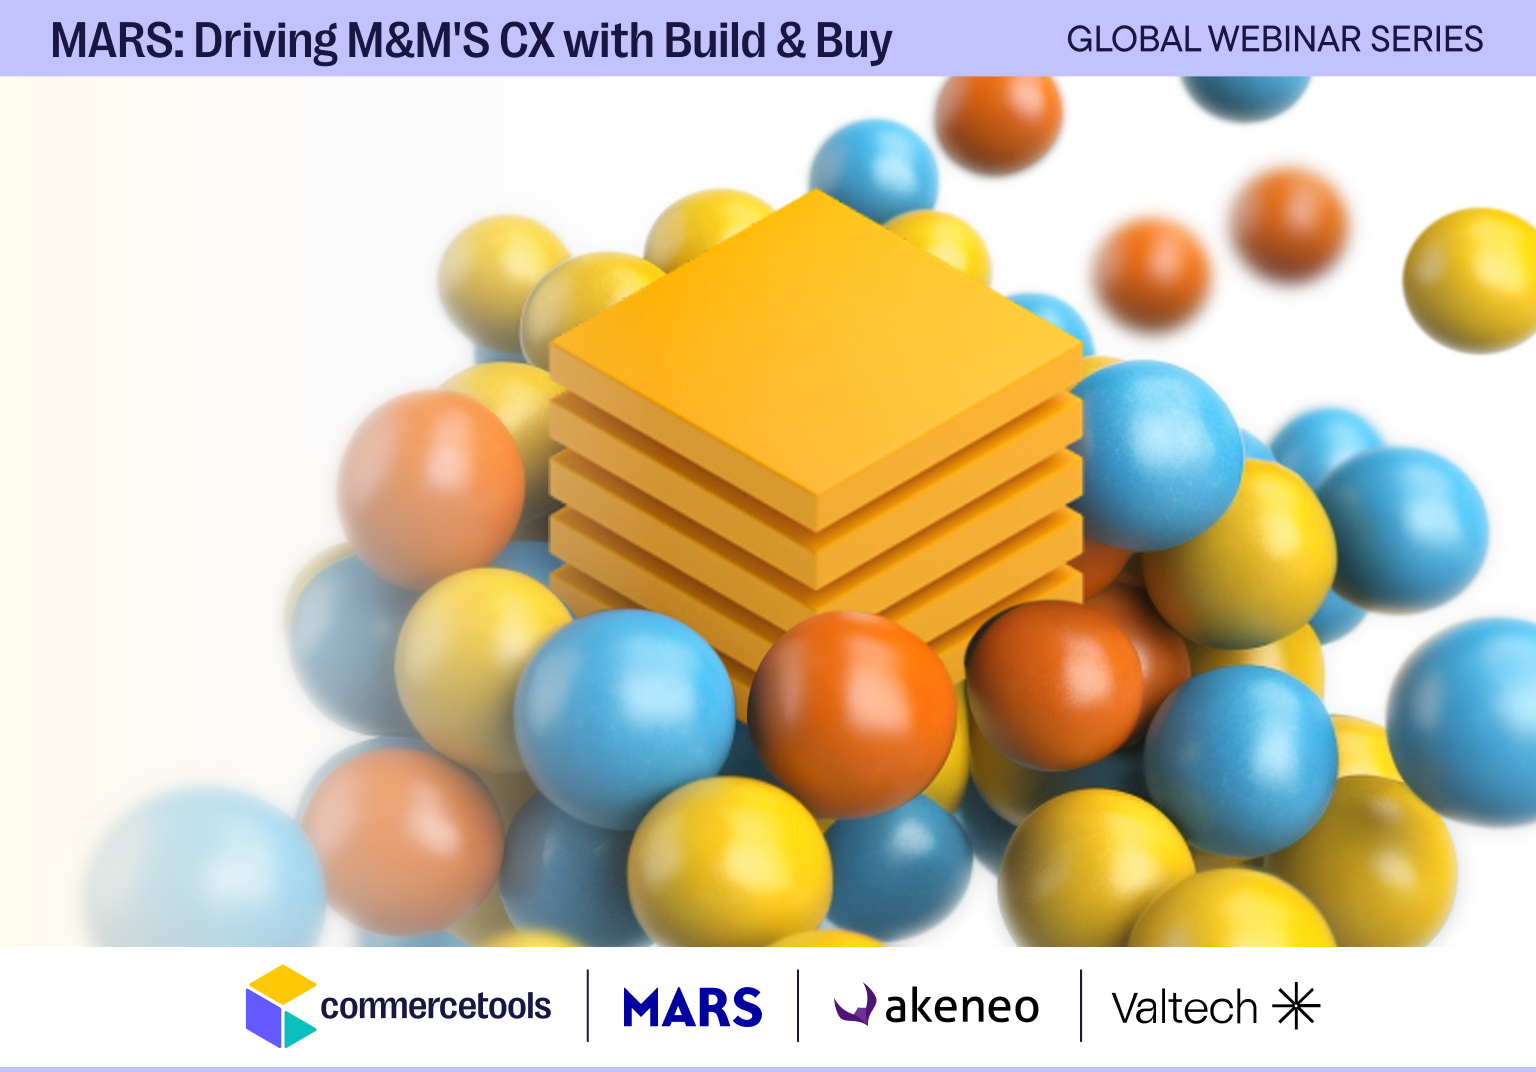 Webinar MARS: Driving M&M’S CX & growth with a Build & Buy approach